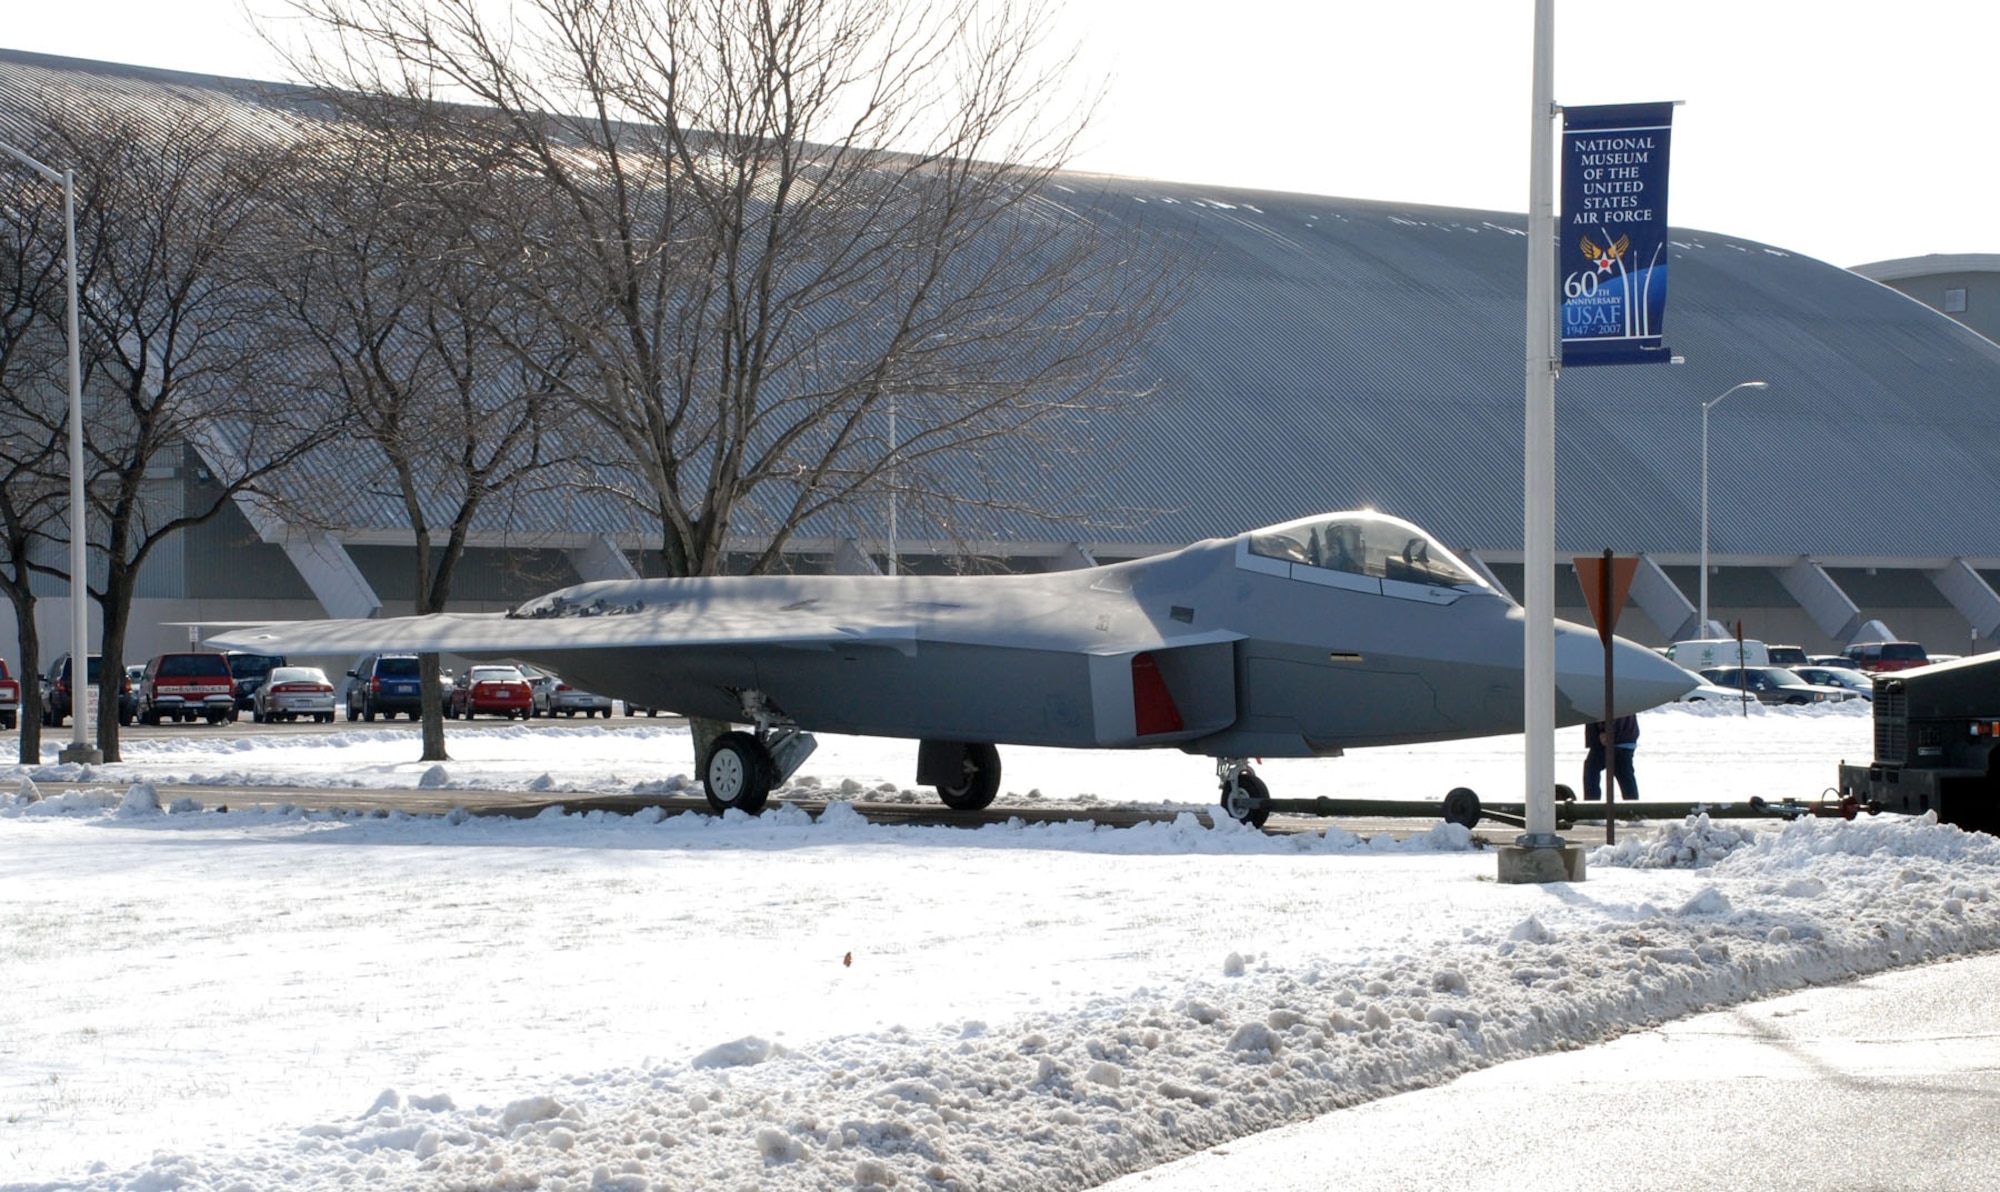 DAYTON, Ohio - The F-22 Raptor as it is moved from the restoration hangar to the National Museum of the U.S. Air Force. (U.S. Air Force photo)